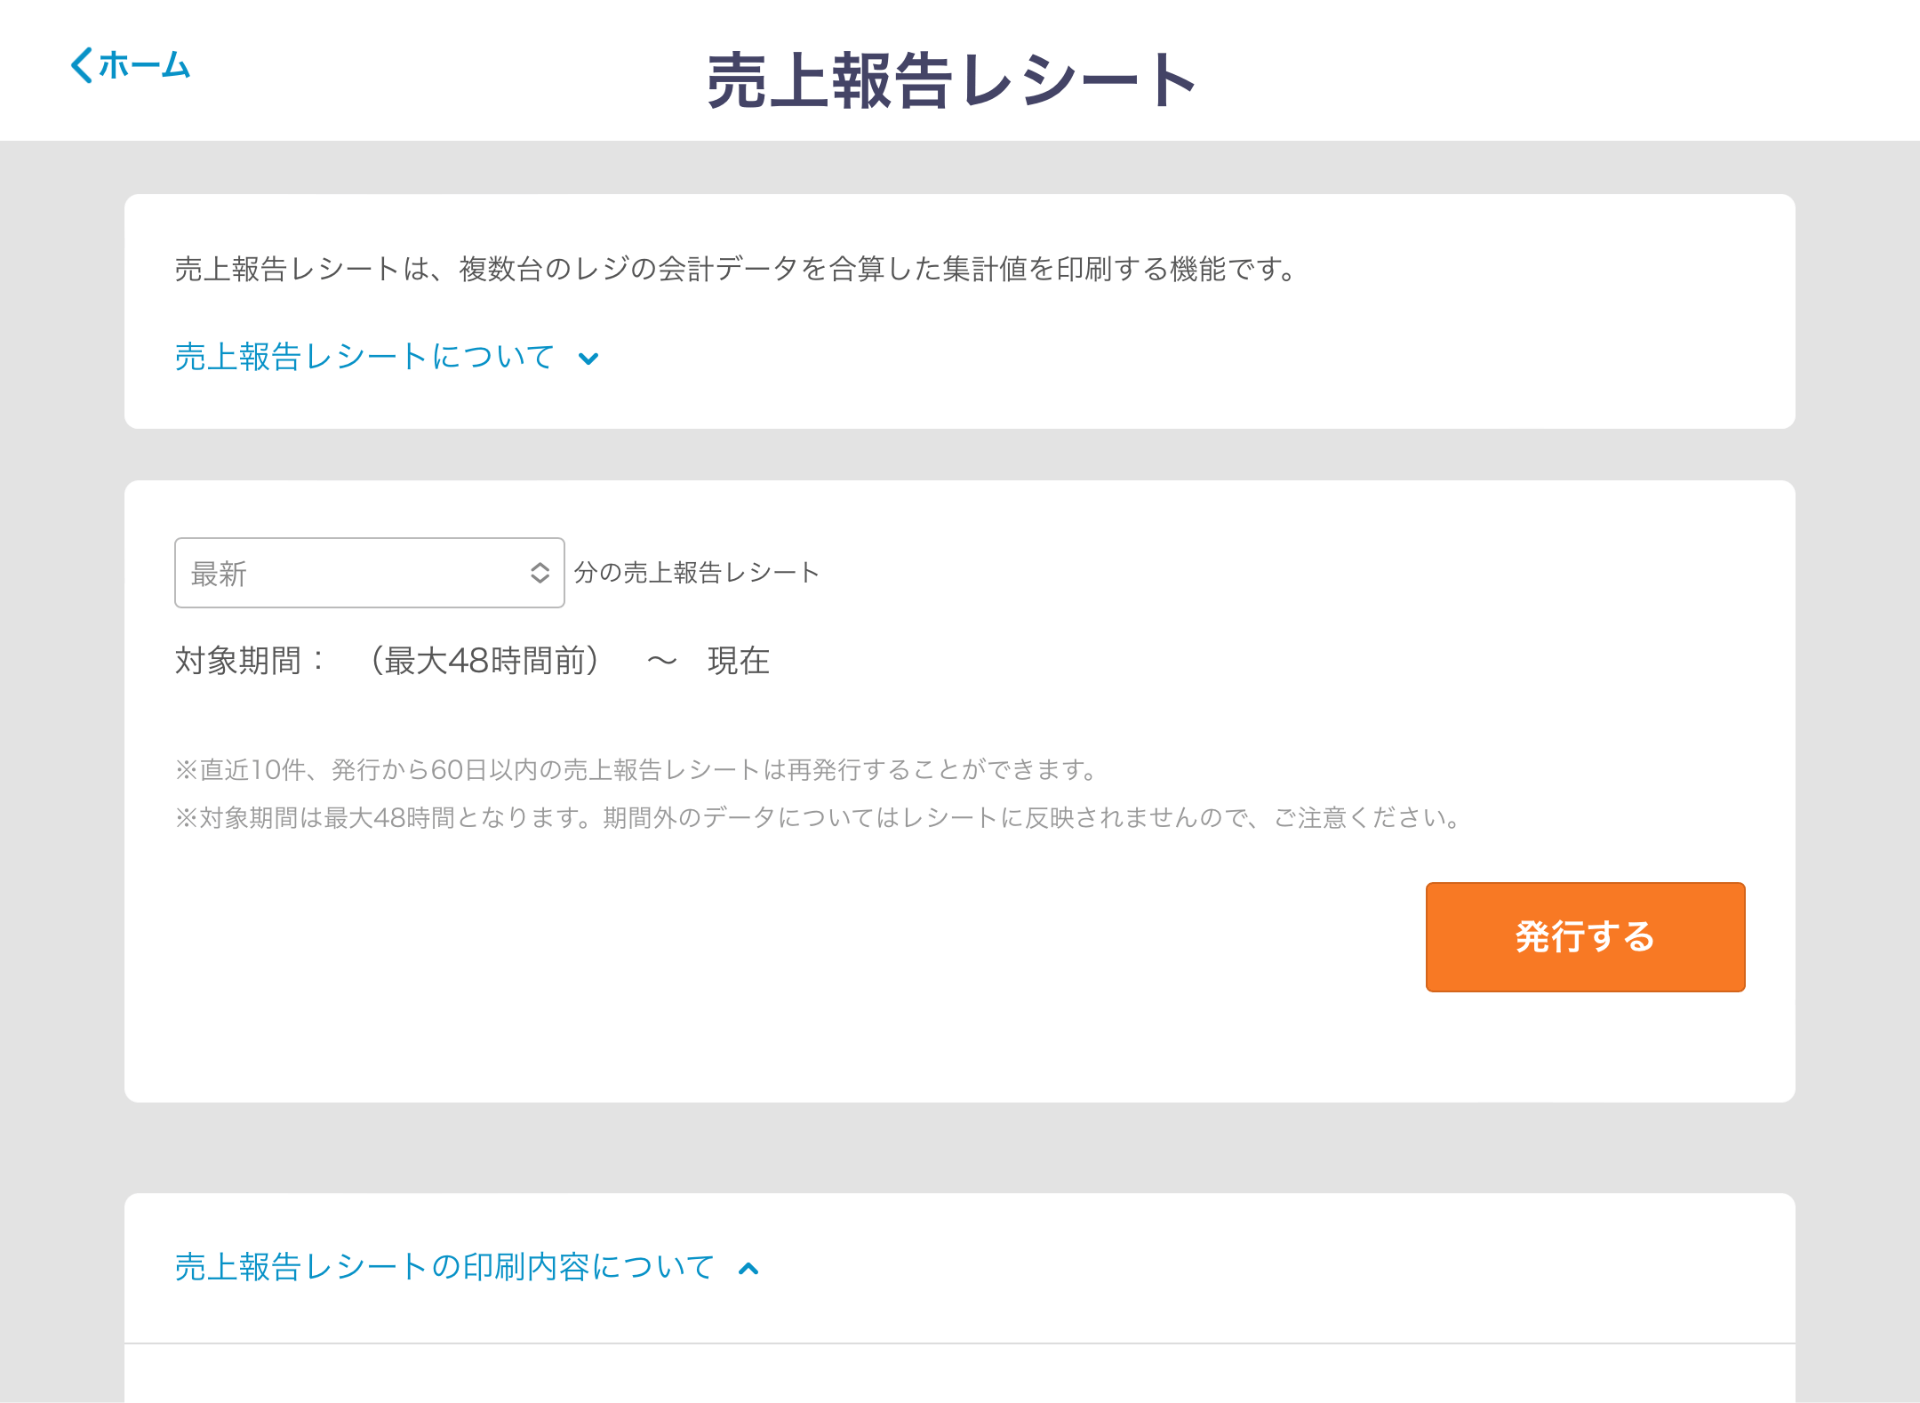 04 Airレジ 売上報告レシート画面